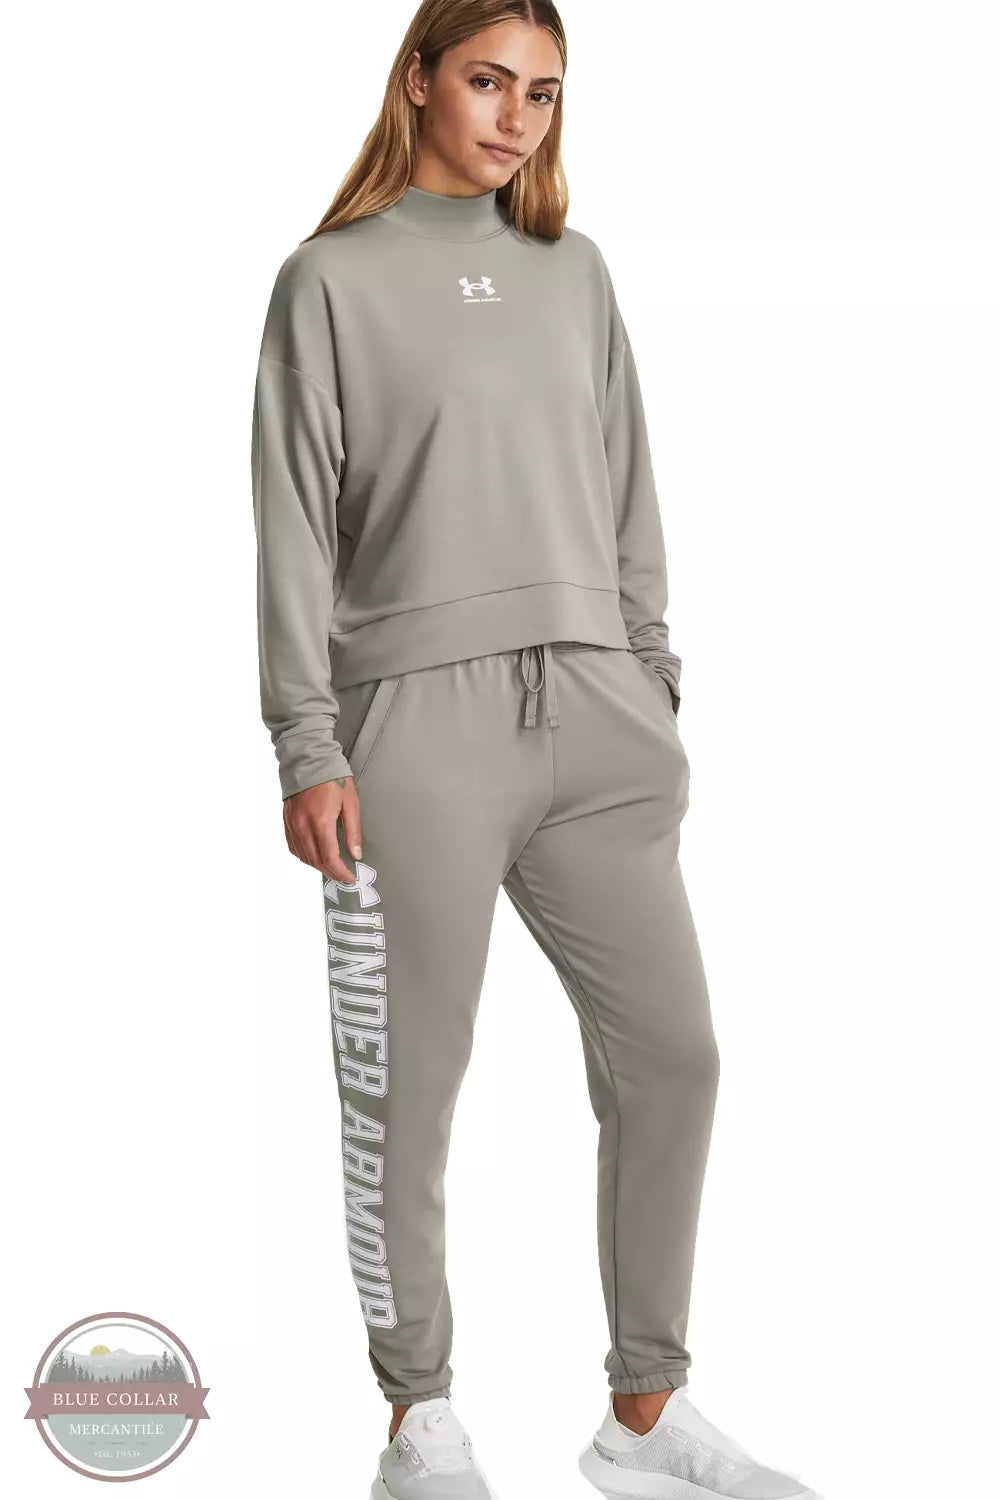 Under Armour 1379437-504 Rival Terry Graphic Jogger in Grove Green/White Full View